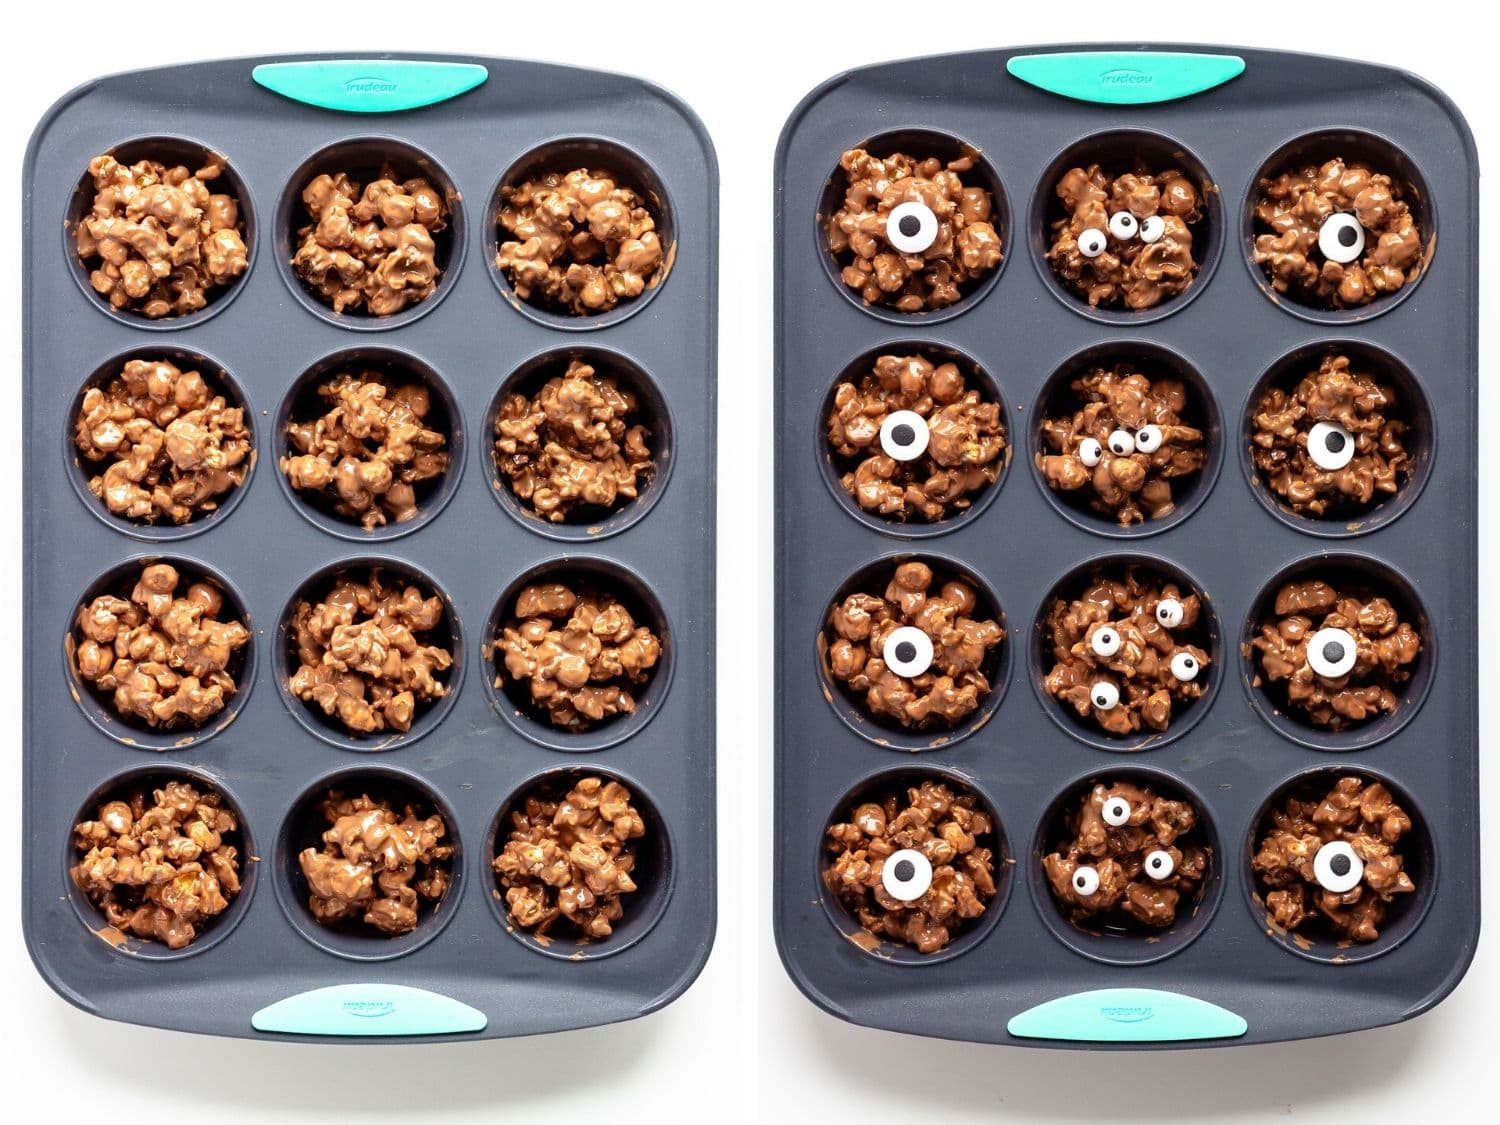 Photo collage showing chocolate popcorn distributed into a silicone muffin pan and then candy eyeballs placed on top.